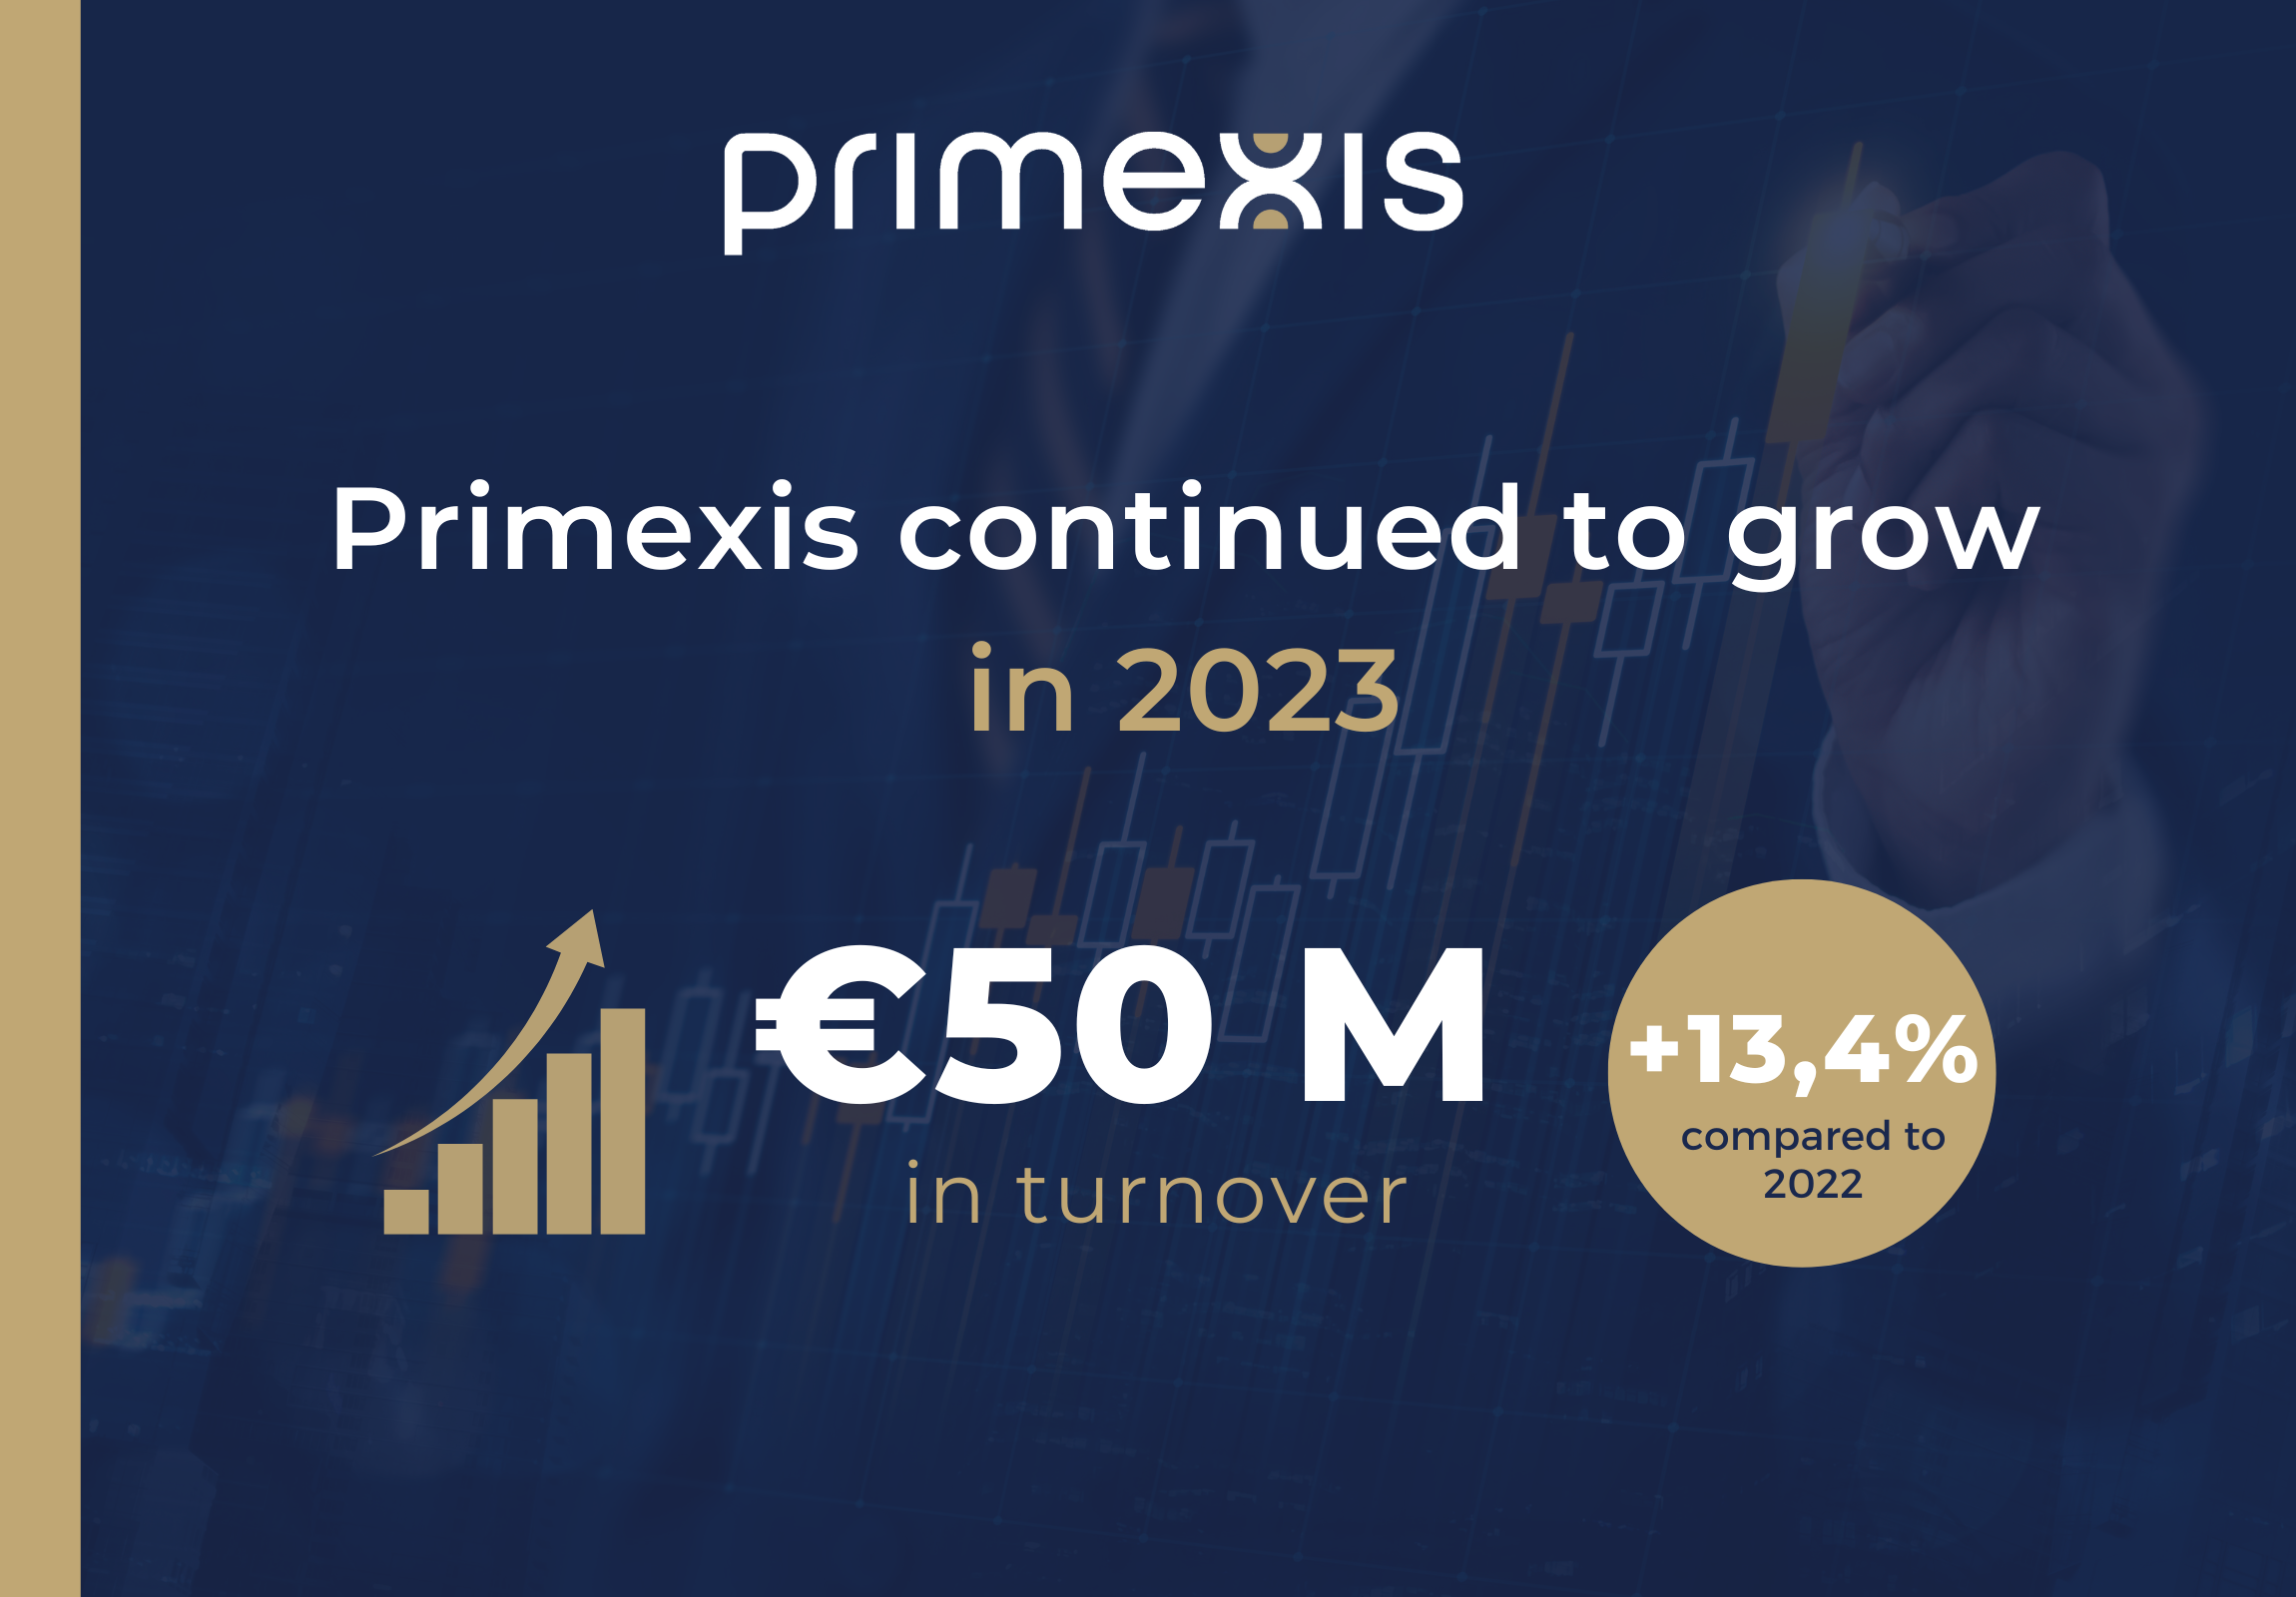 Primexis continued to grow in 2023 